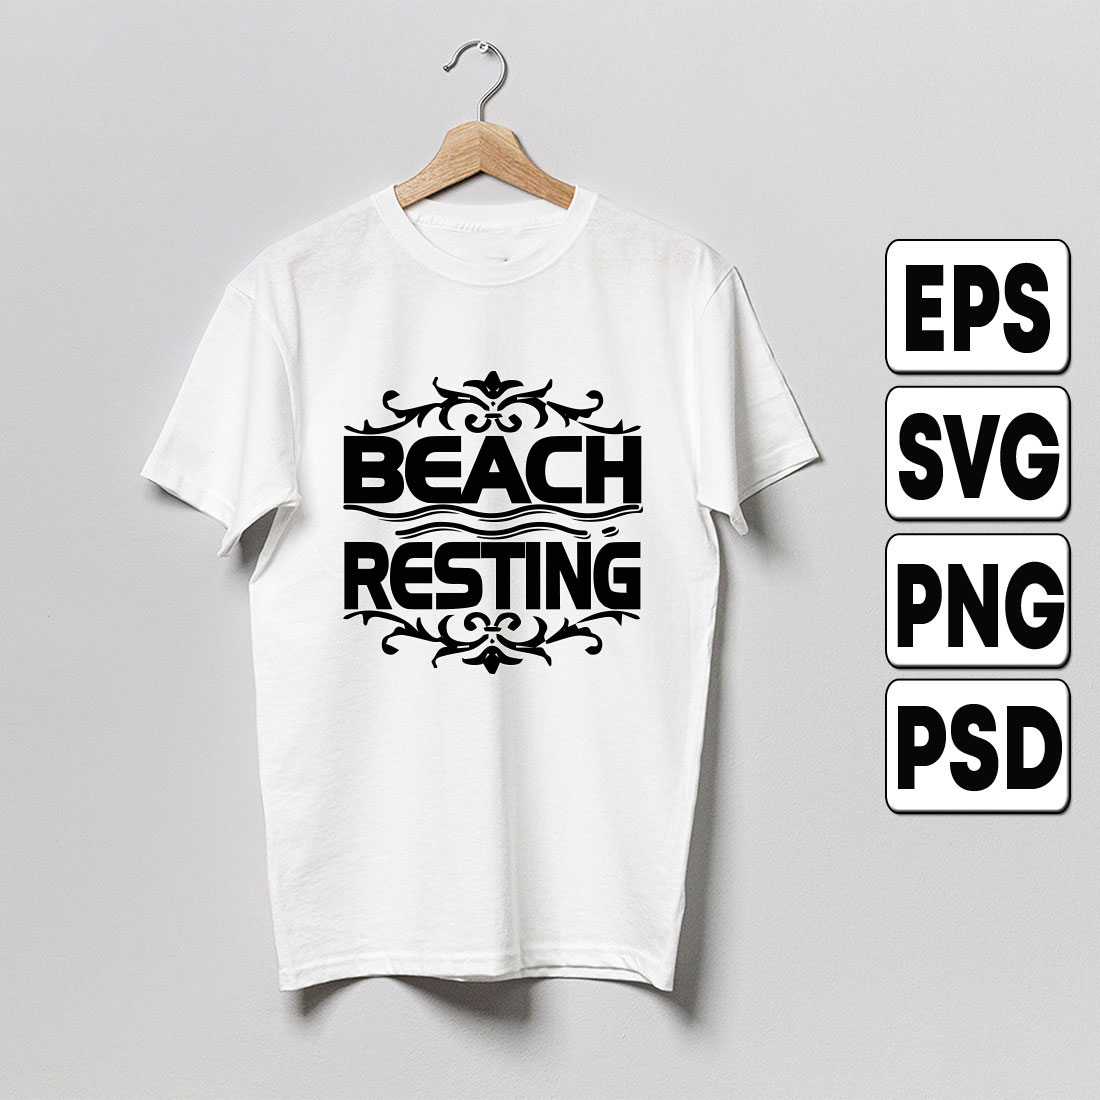 Beach Resting cover image.